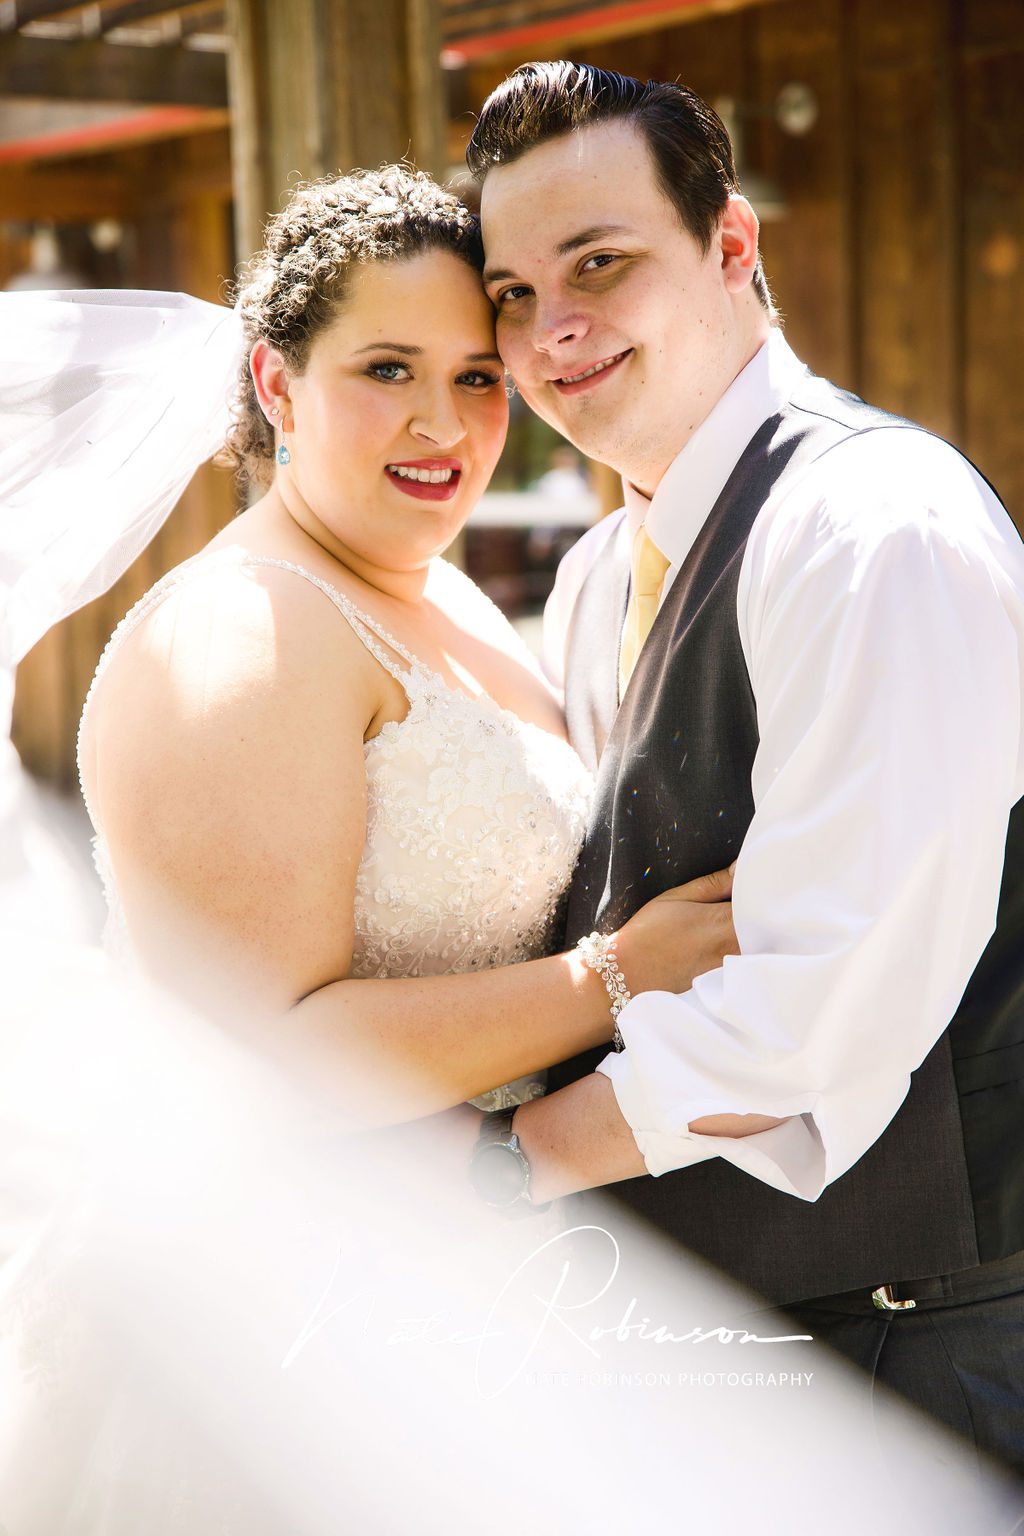 A long white veil flies in front of a newlywed couple wearing a white lace wedding dress and a black vest and yellow tie rustic river wedding venue